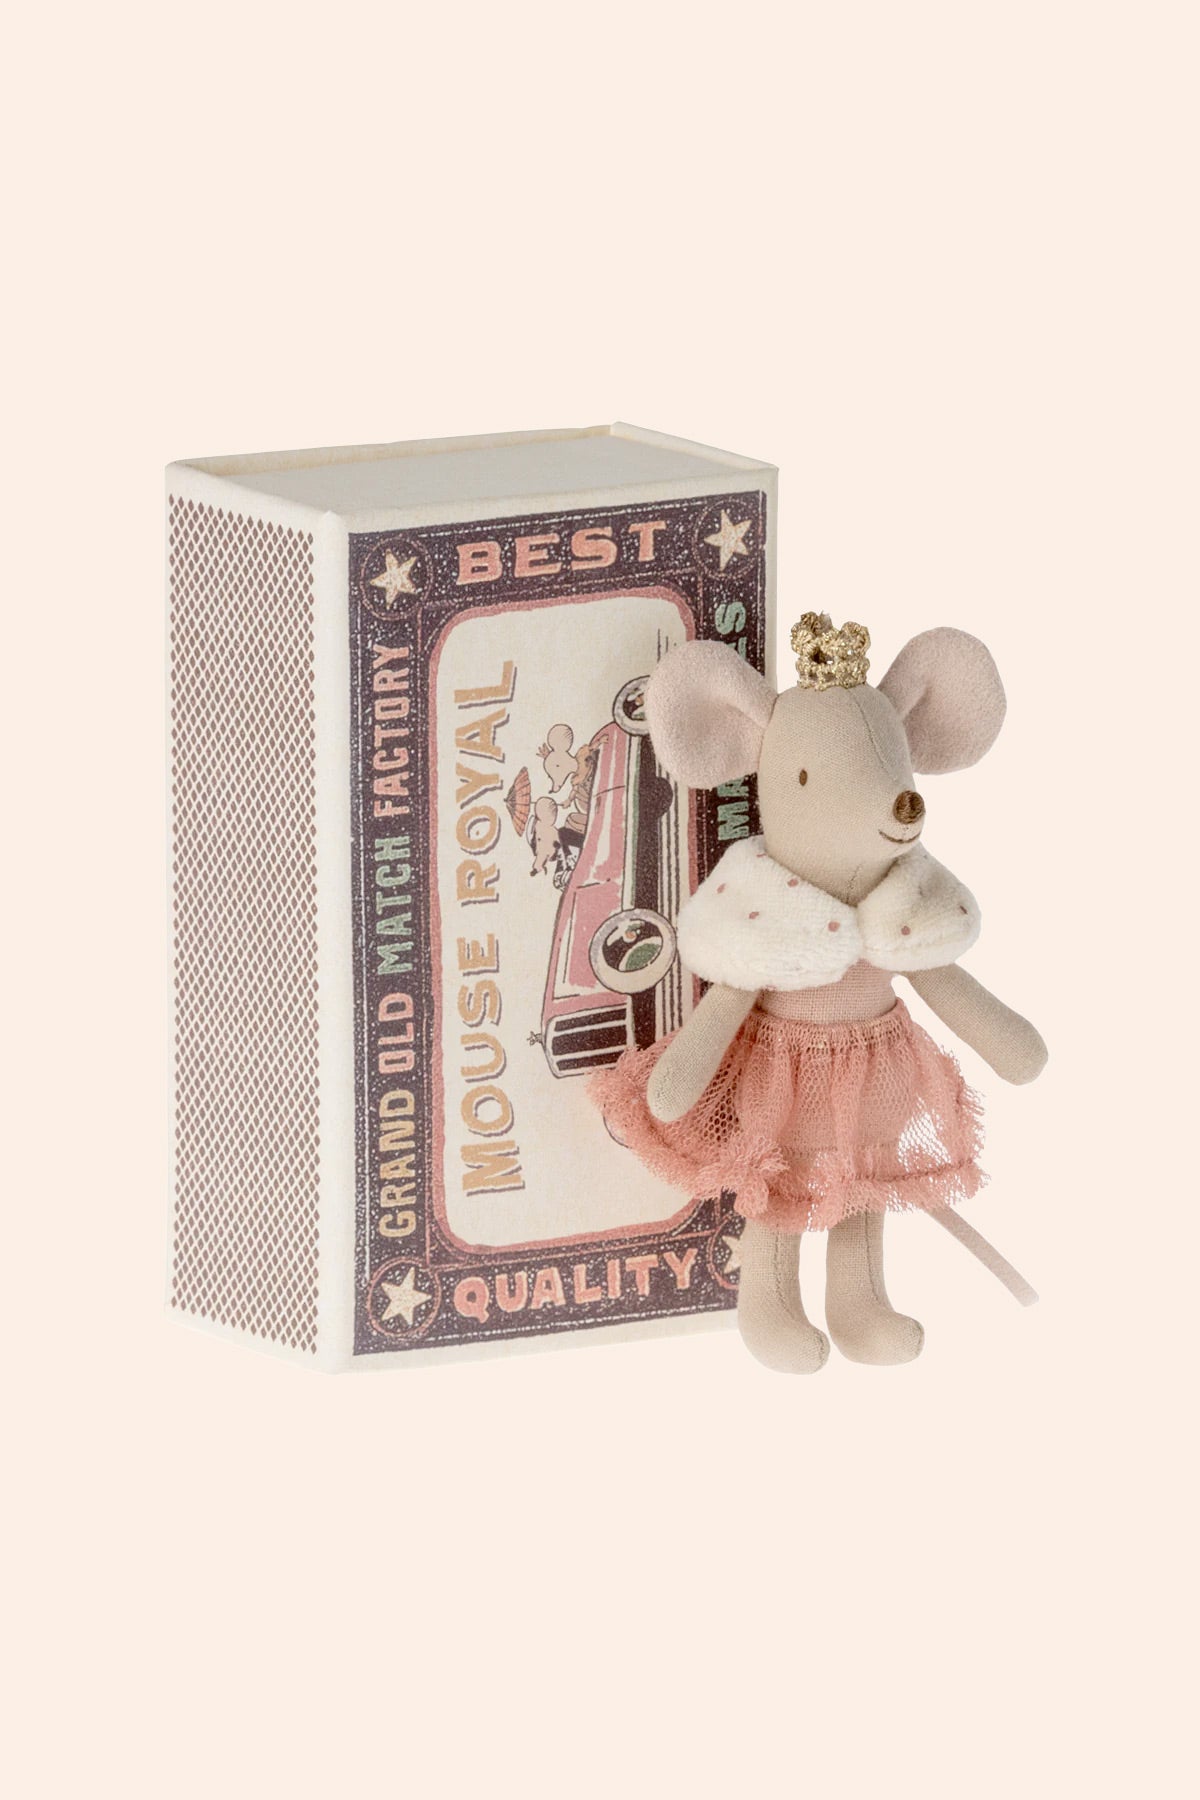 Maileg Princess Mouse, Little Sister in Match Box